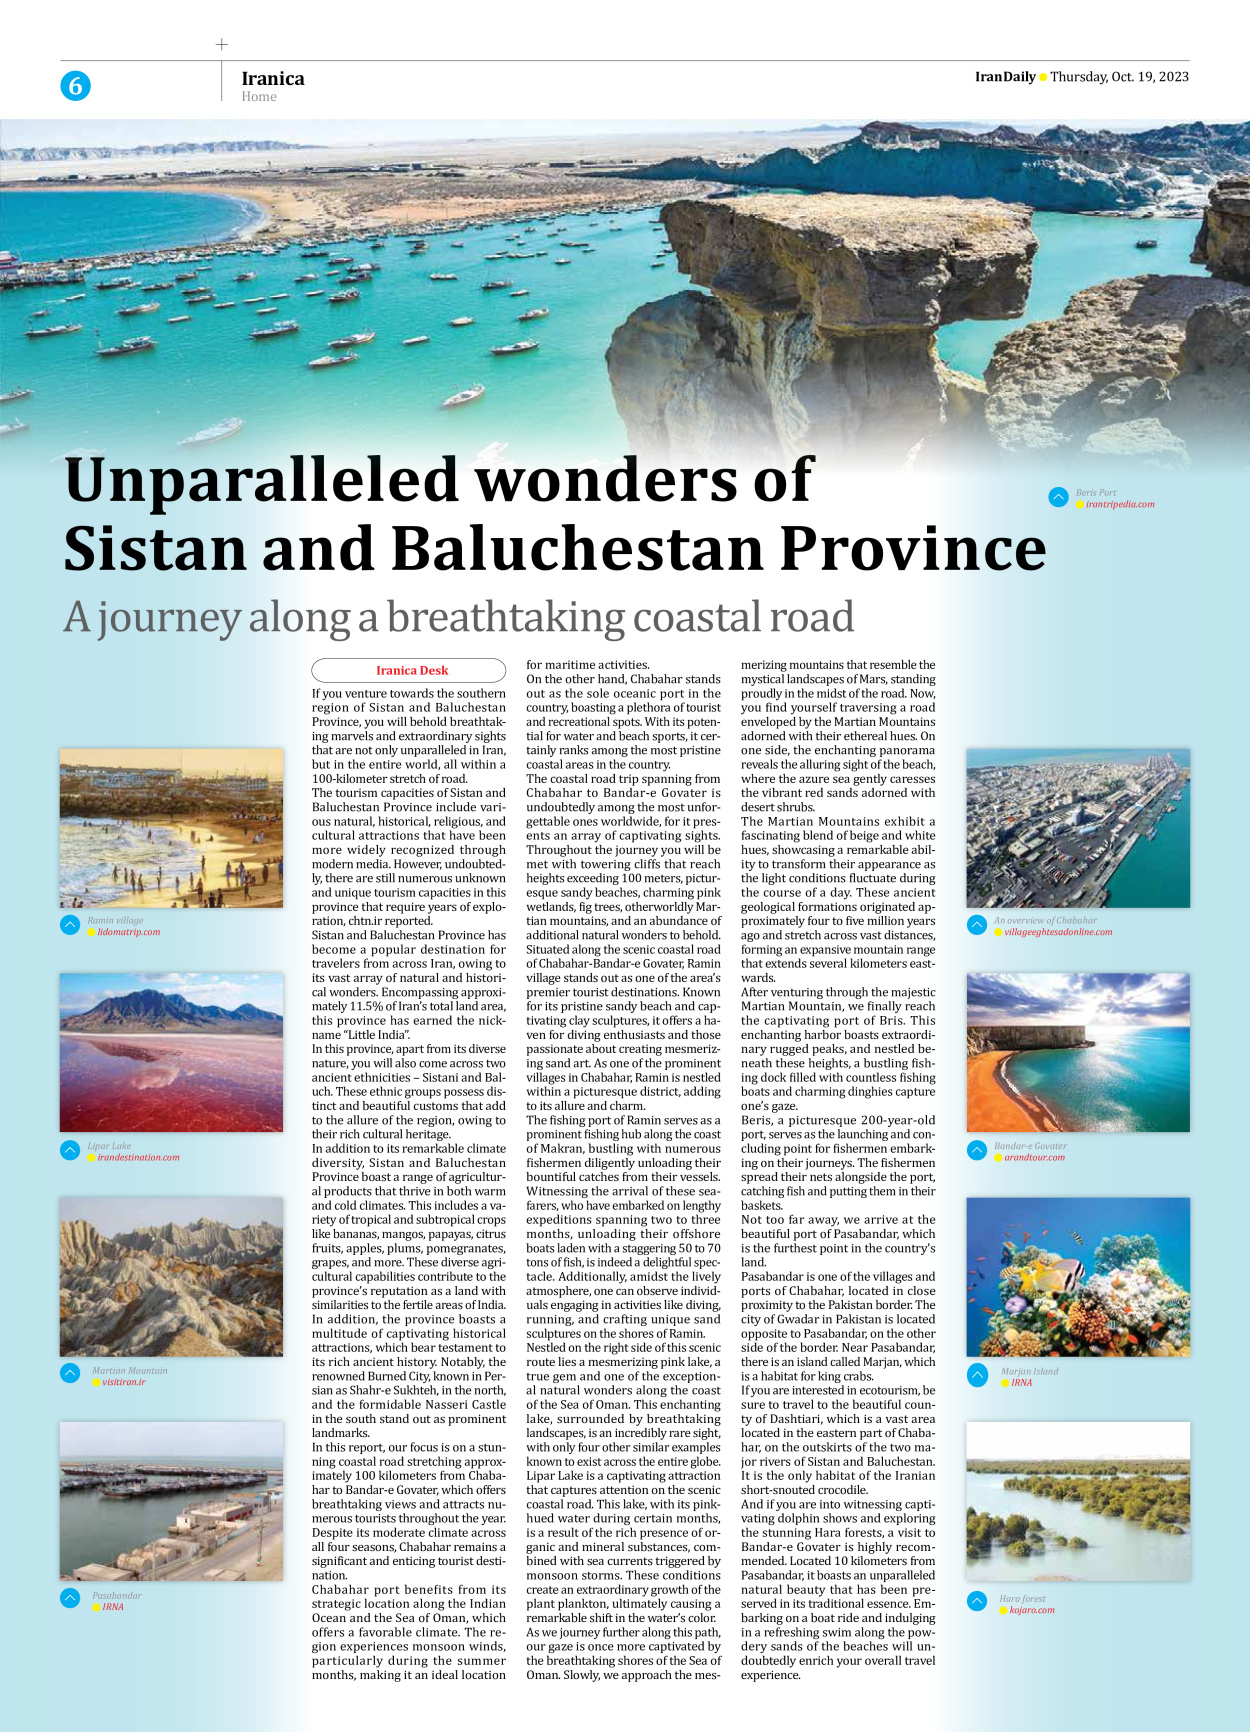 Iran Daily - Number Seven Thousand Four Hundred and Twelve - 19 October 2023 - Page 6